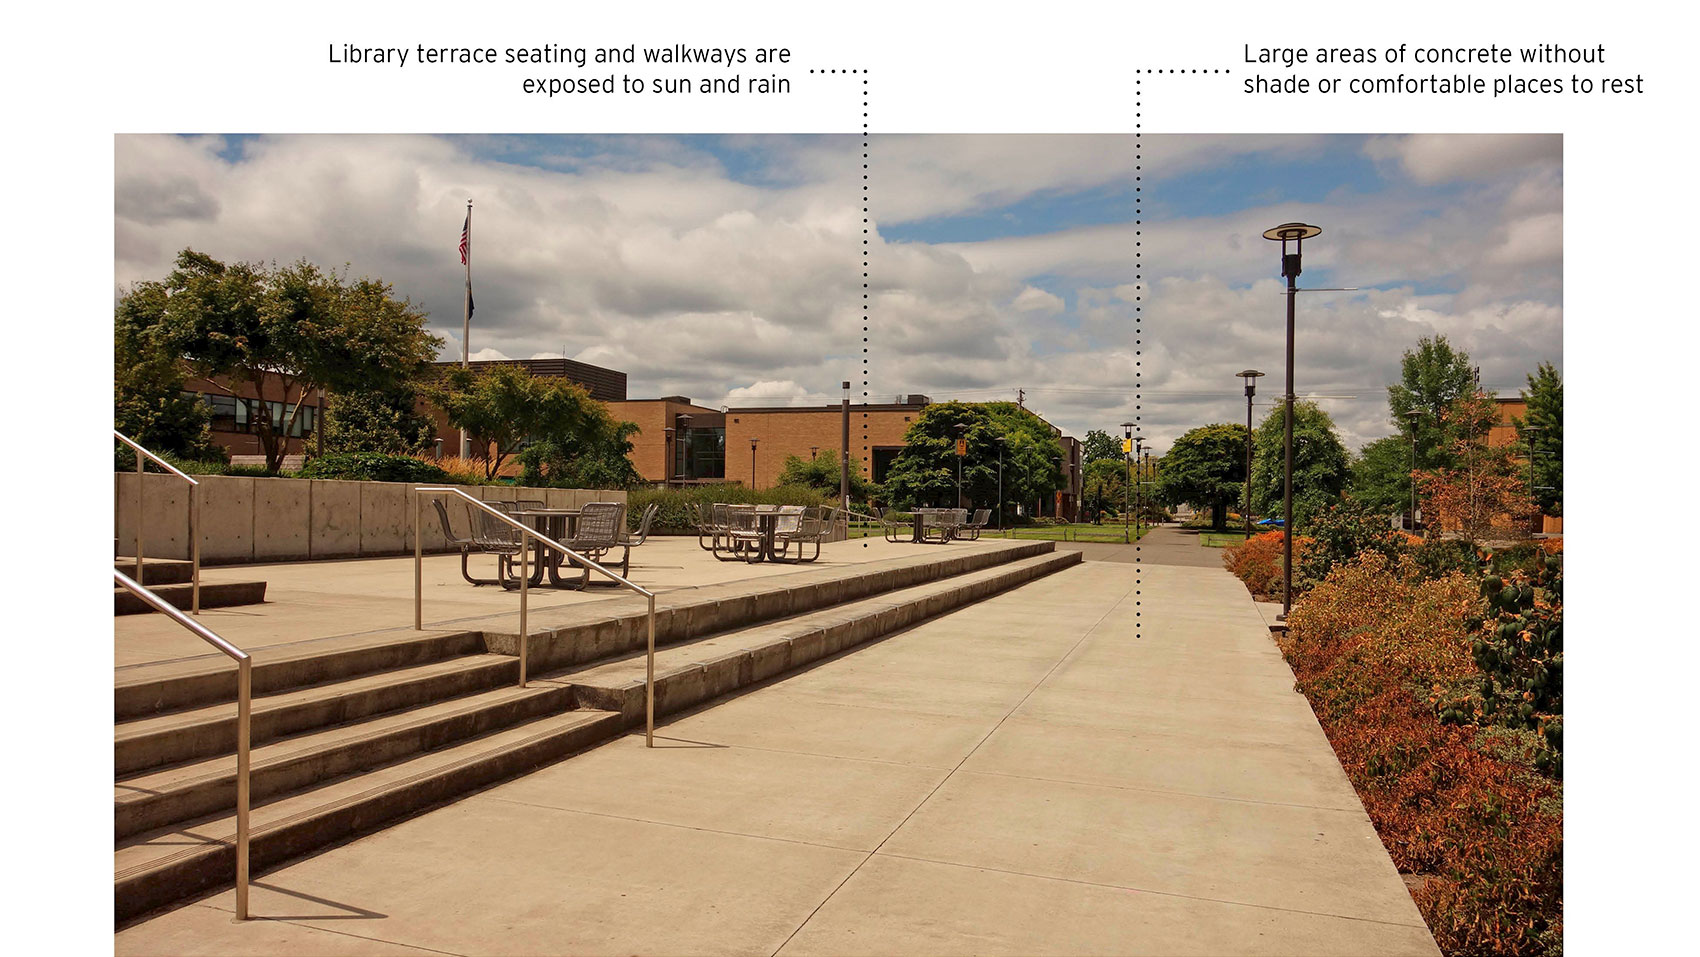 Library Terrace|Photograph taken on a sunny day looking west toward the Borthwick Mall from the concrete pathway north of the library. The stairs up to the library are at the left. Metal seating is shown on the terrace on the left, two steps above the pathway. To the right is a landscaped area. The pathway is labeled “Large areas of concrete without shade or comfortable places to rest”. The terrace area is labeled “Library terrace seating and walkways are exposed to sun and rain”.